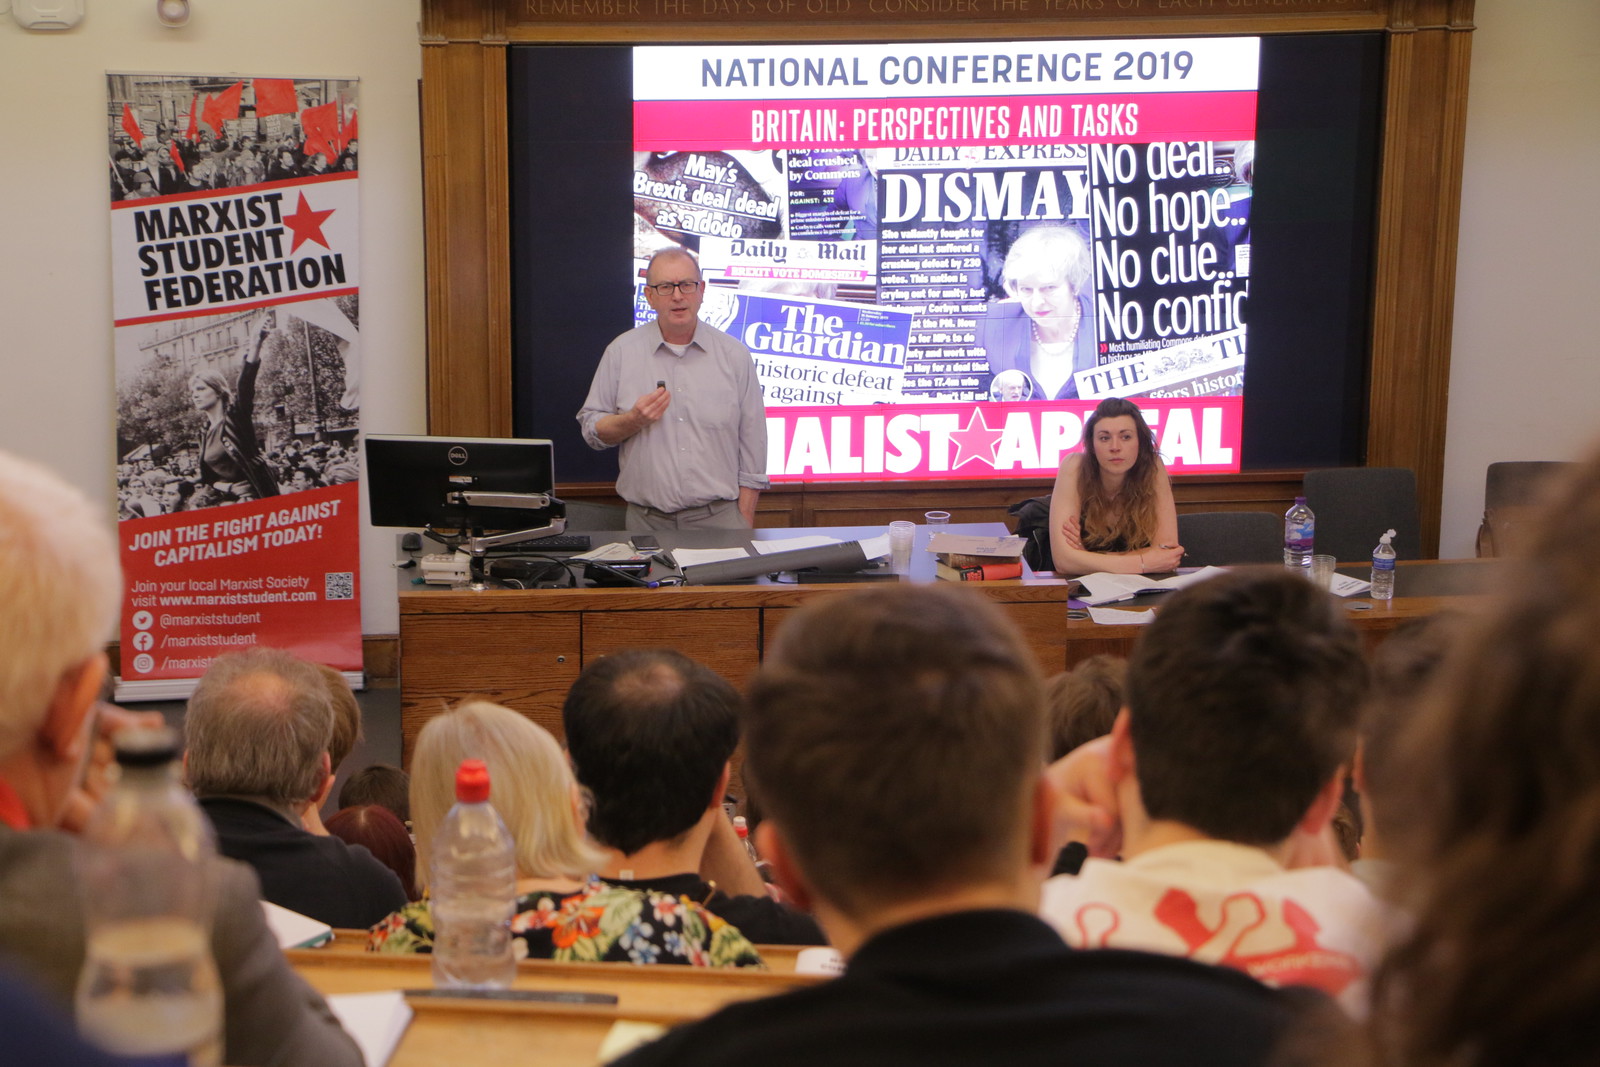 Socialist Appeal conference 2019